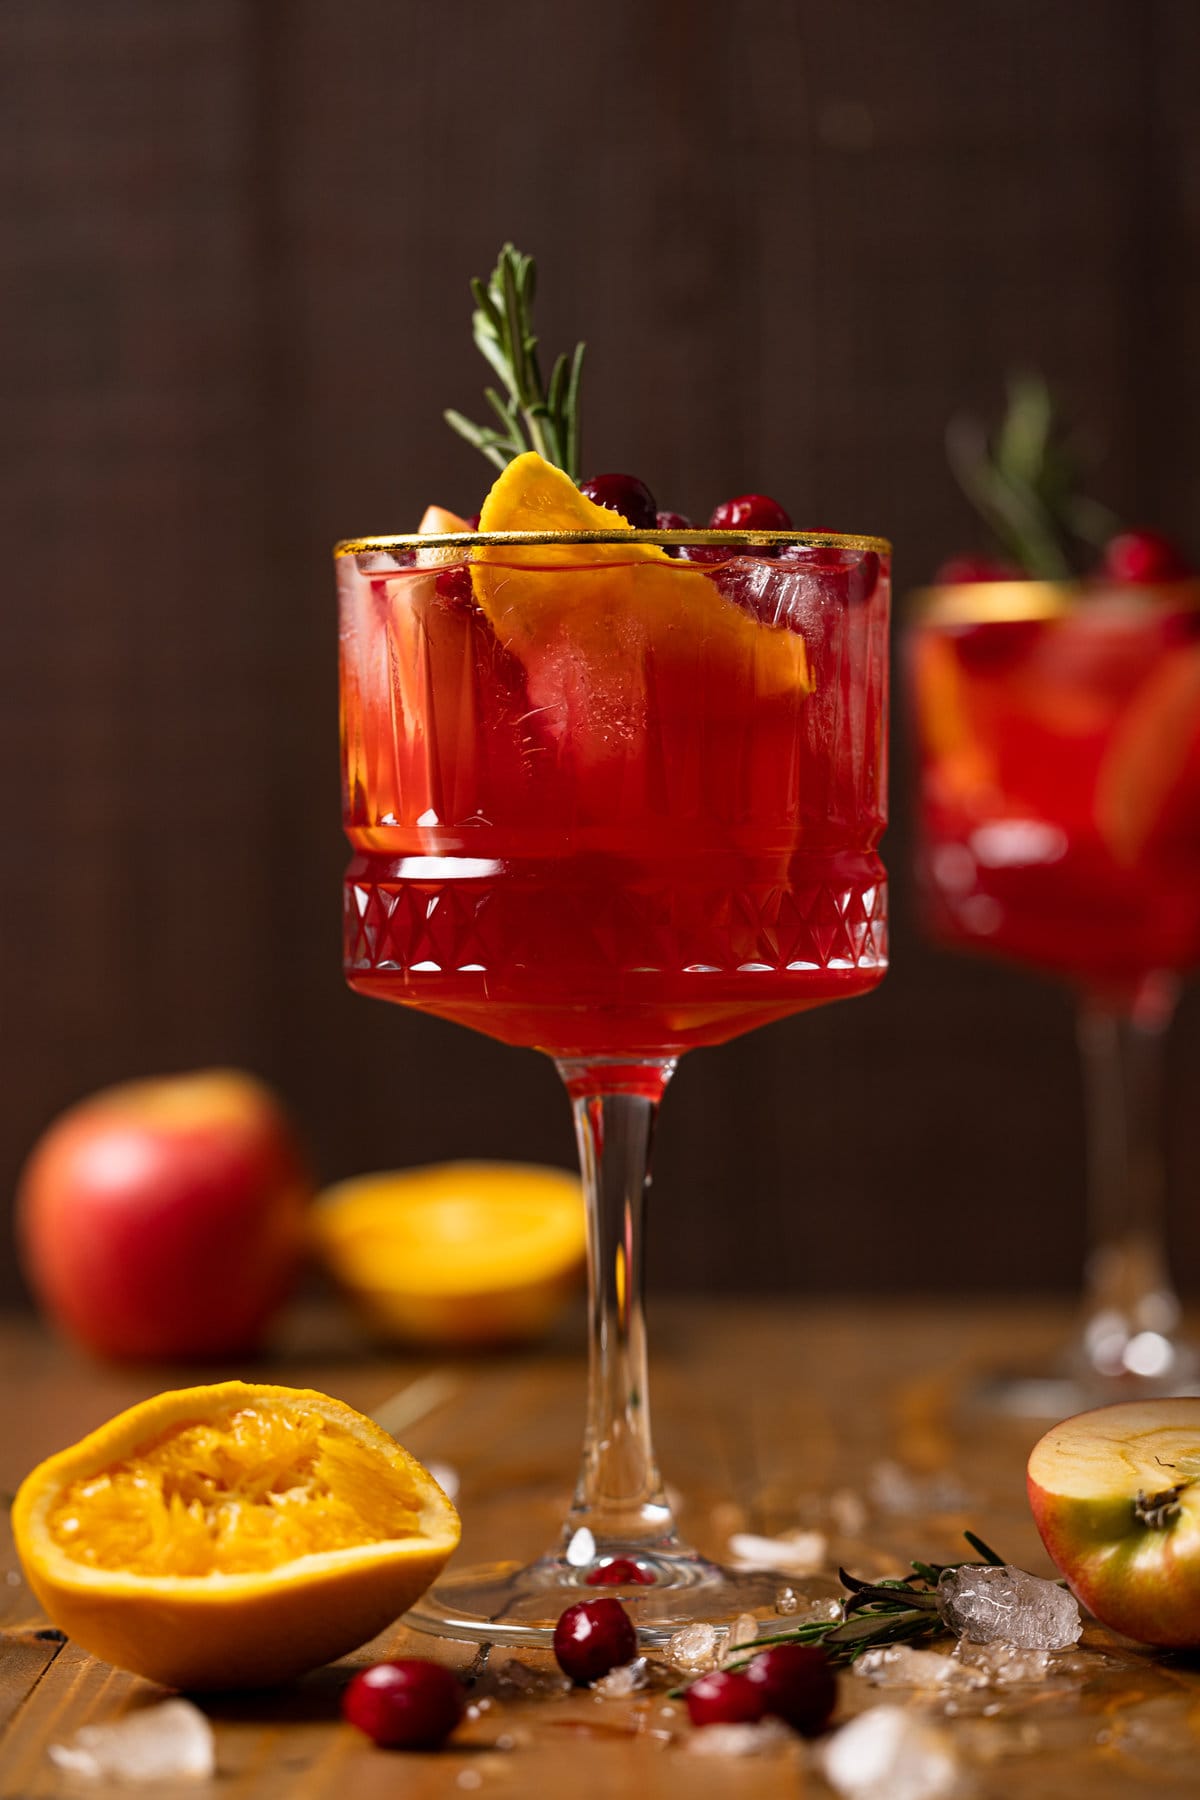 Long-stemmed glass of Cranberry Apple Cider Orange Sangria topped with fruit and a sprig of rosemary on a wooden table